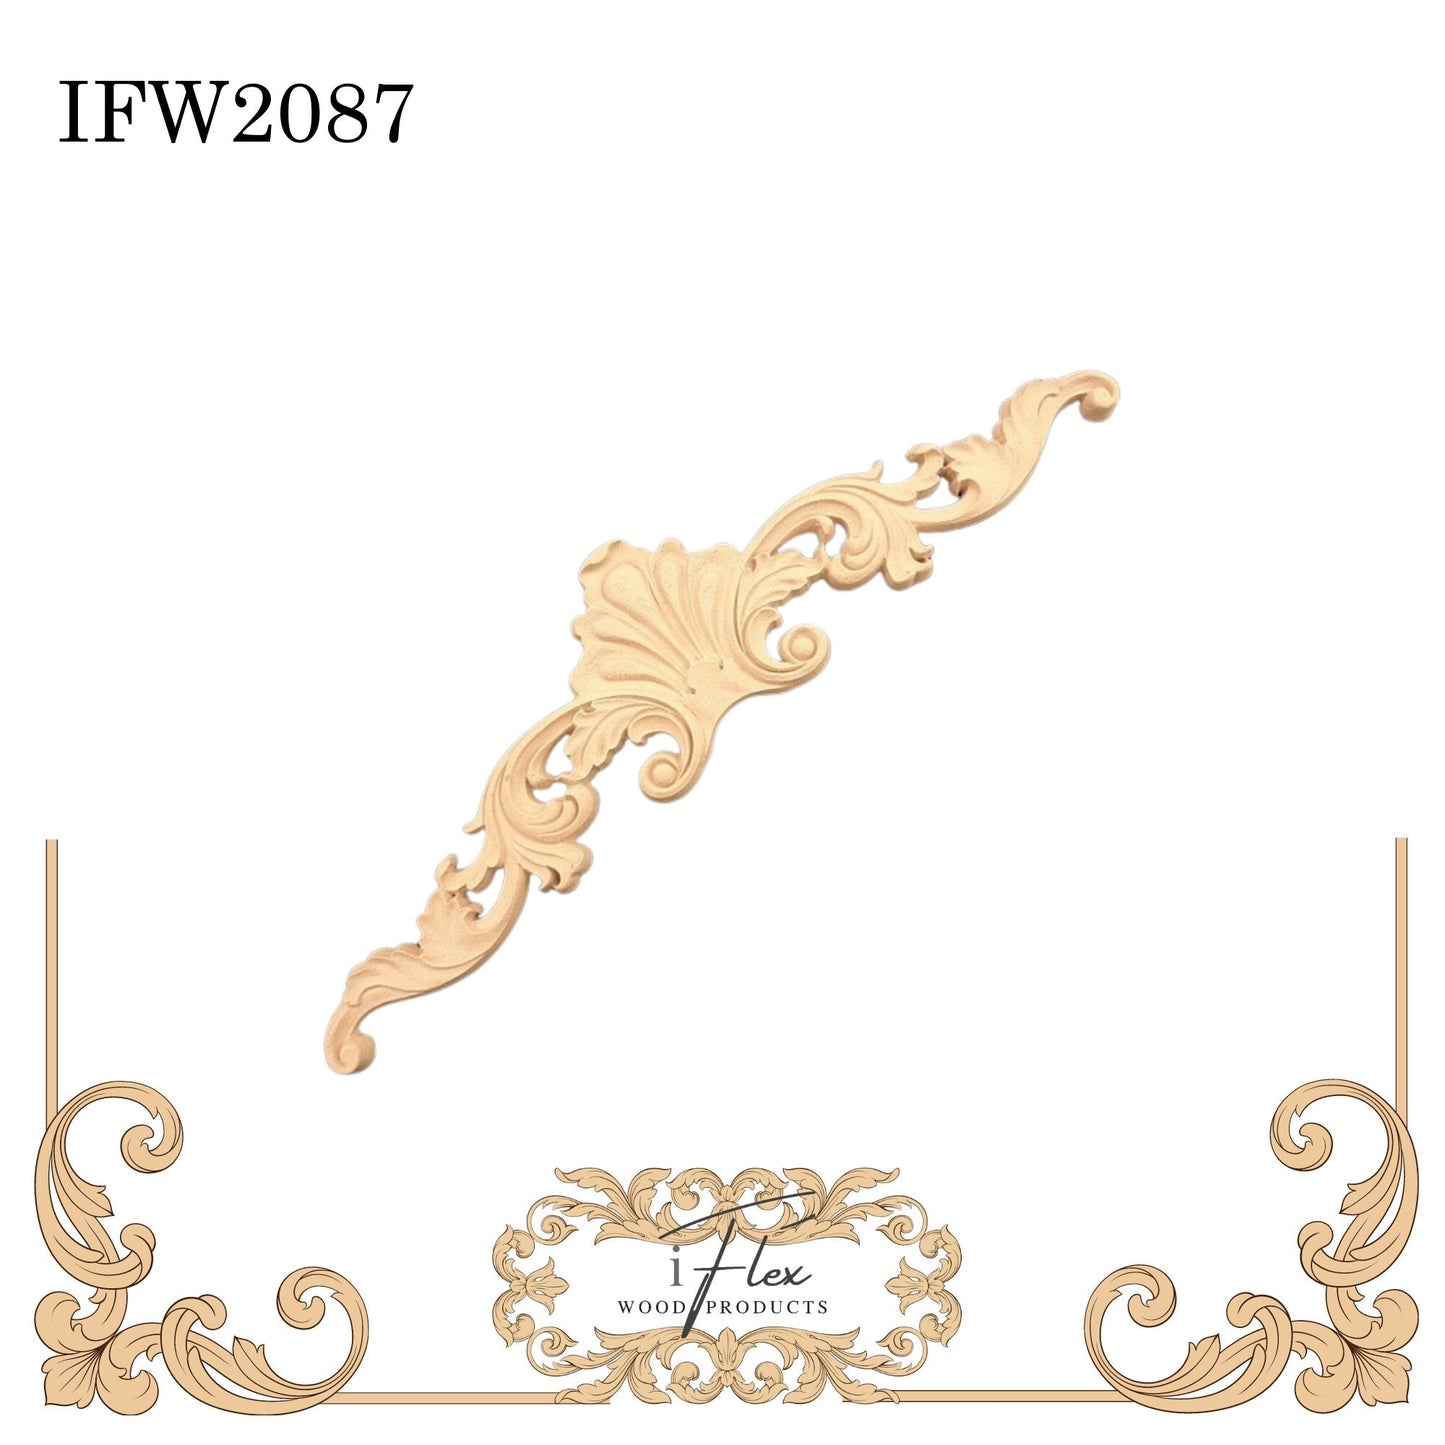 IFW 2087 iFlex Wood Products, bendable mouldings, flexible, wooden appliques, pediment